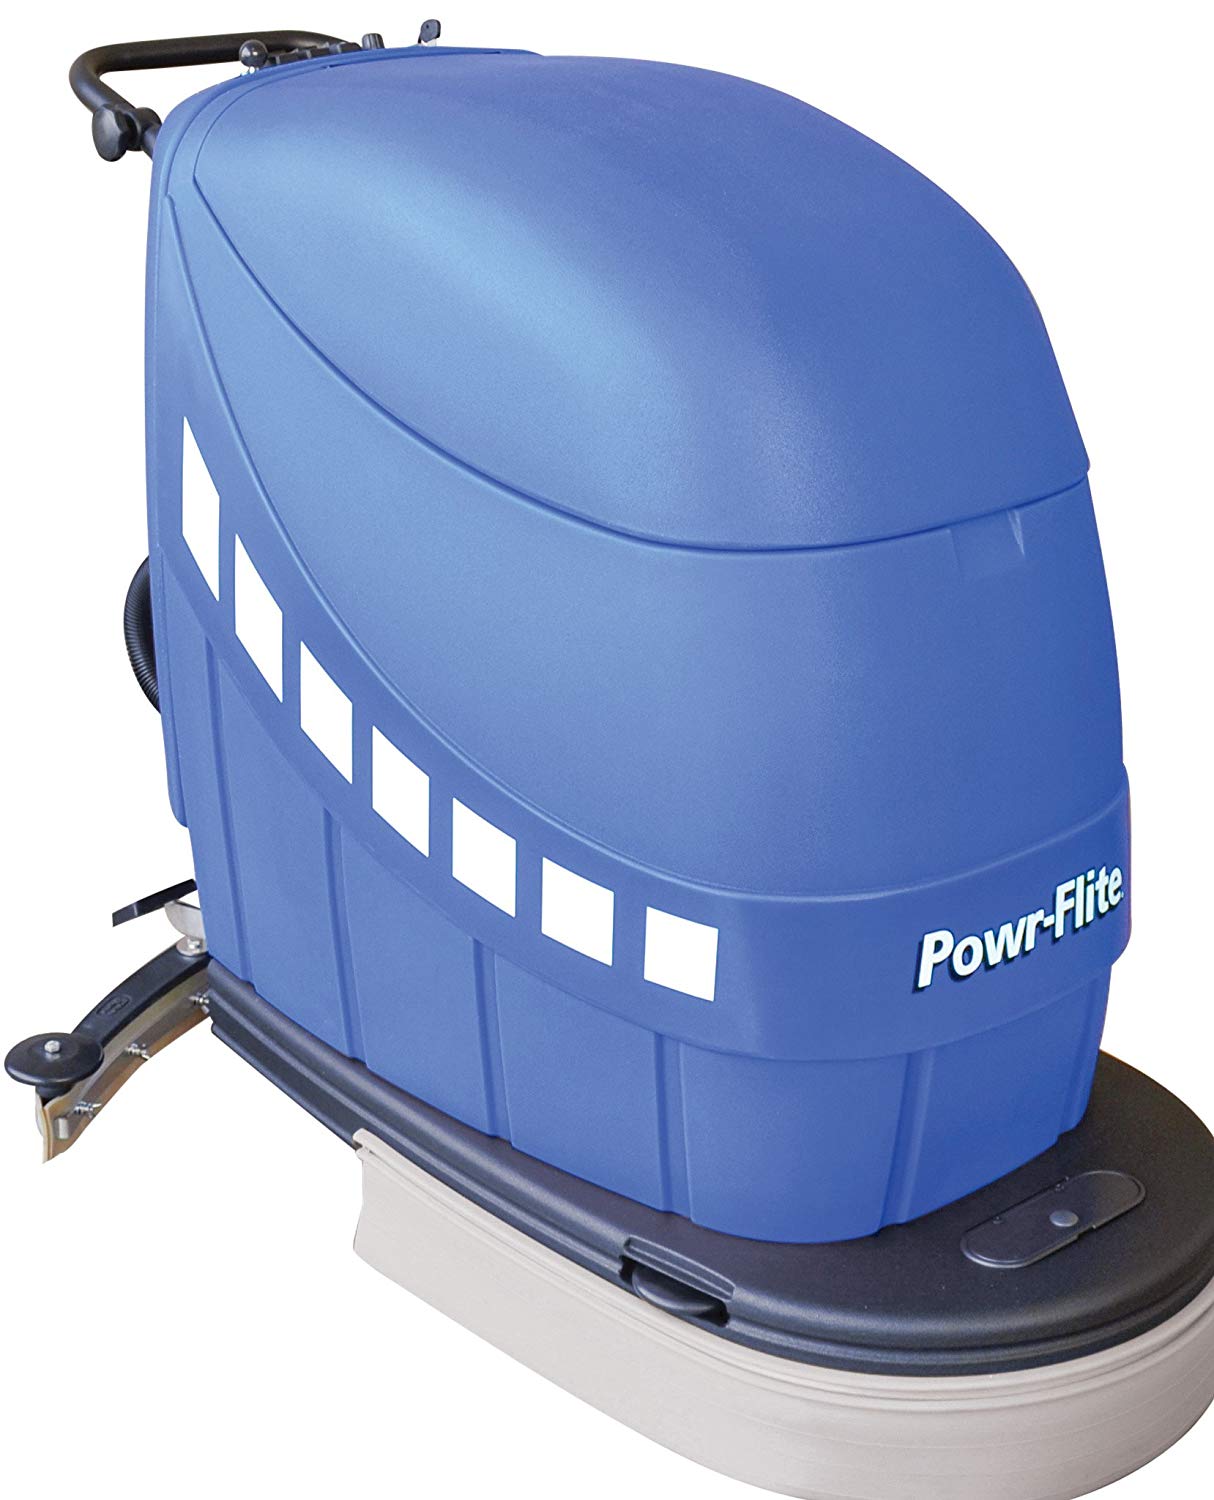 Powr-Flite PAS20-DXBC Self-Propelled Battery Powered Automatic Scrubber, 180 rpm, 20" - CalCleaningEquipment